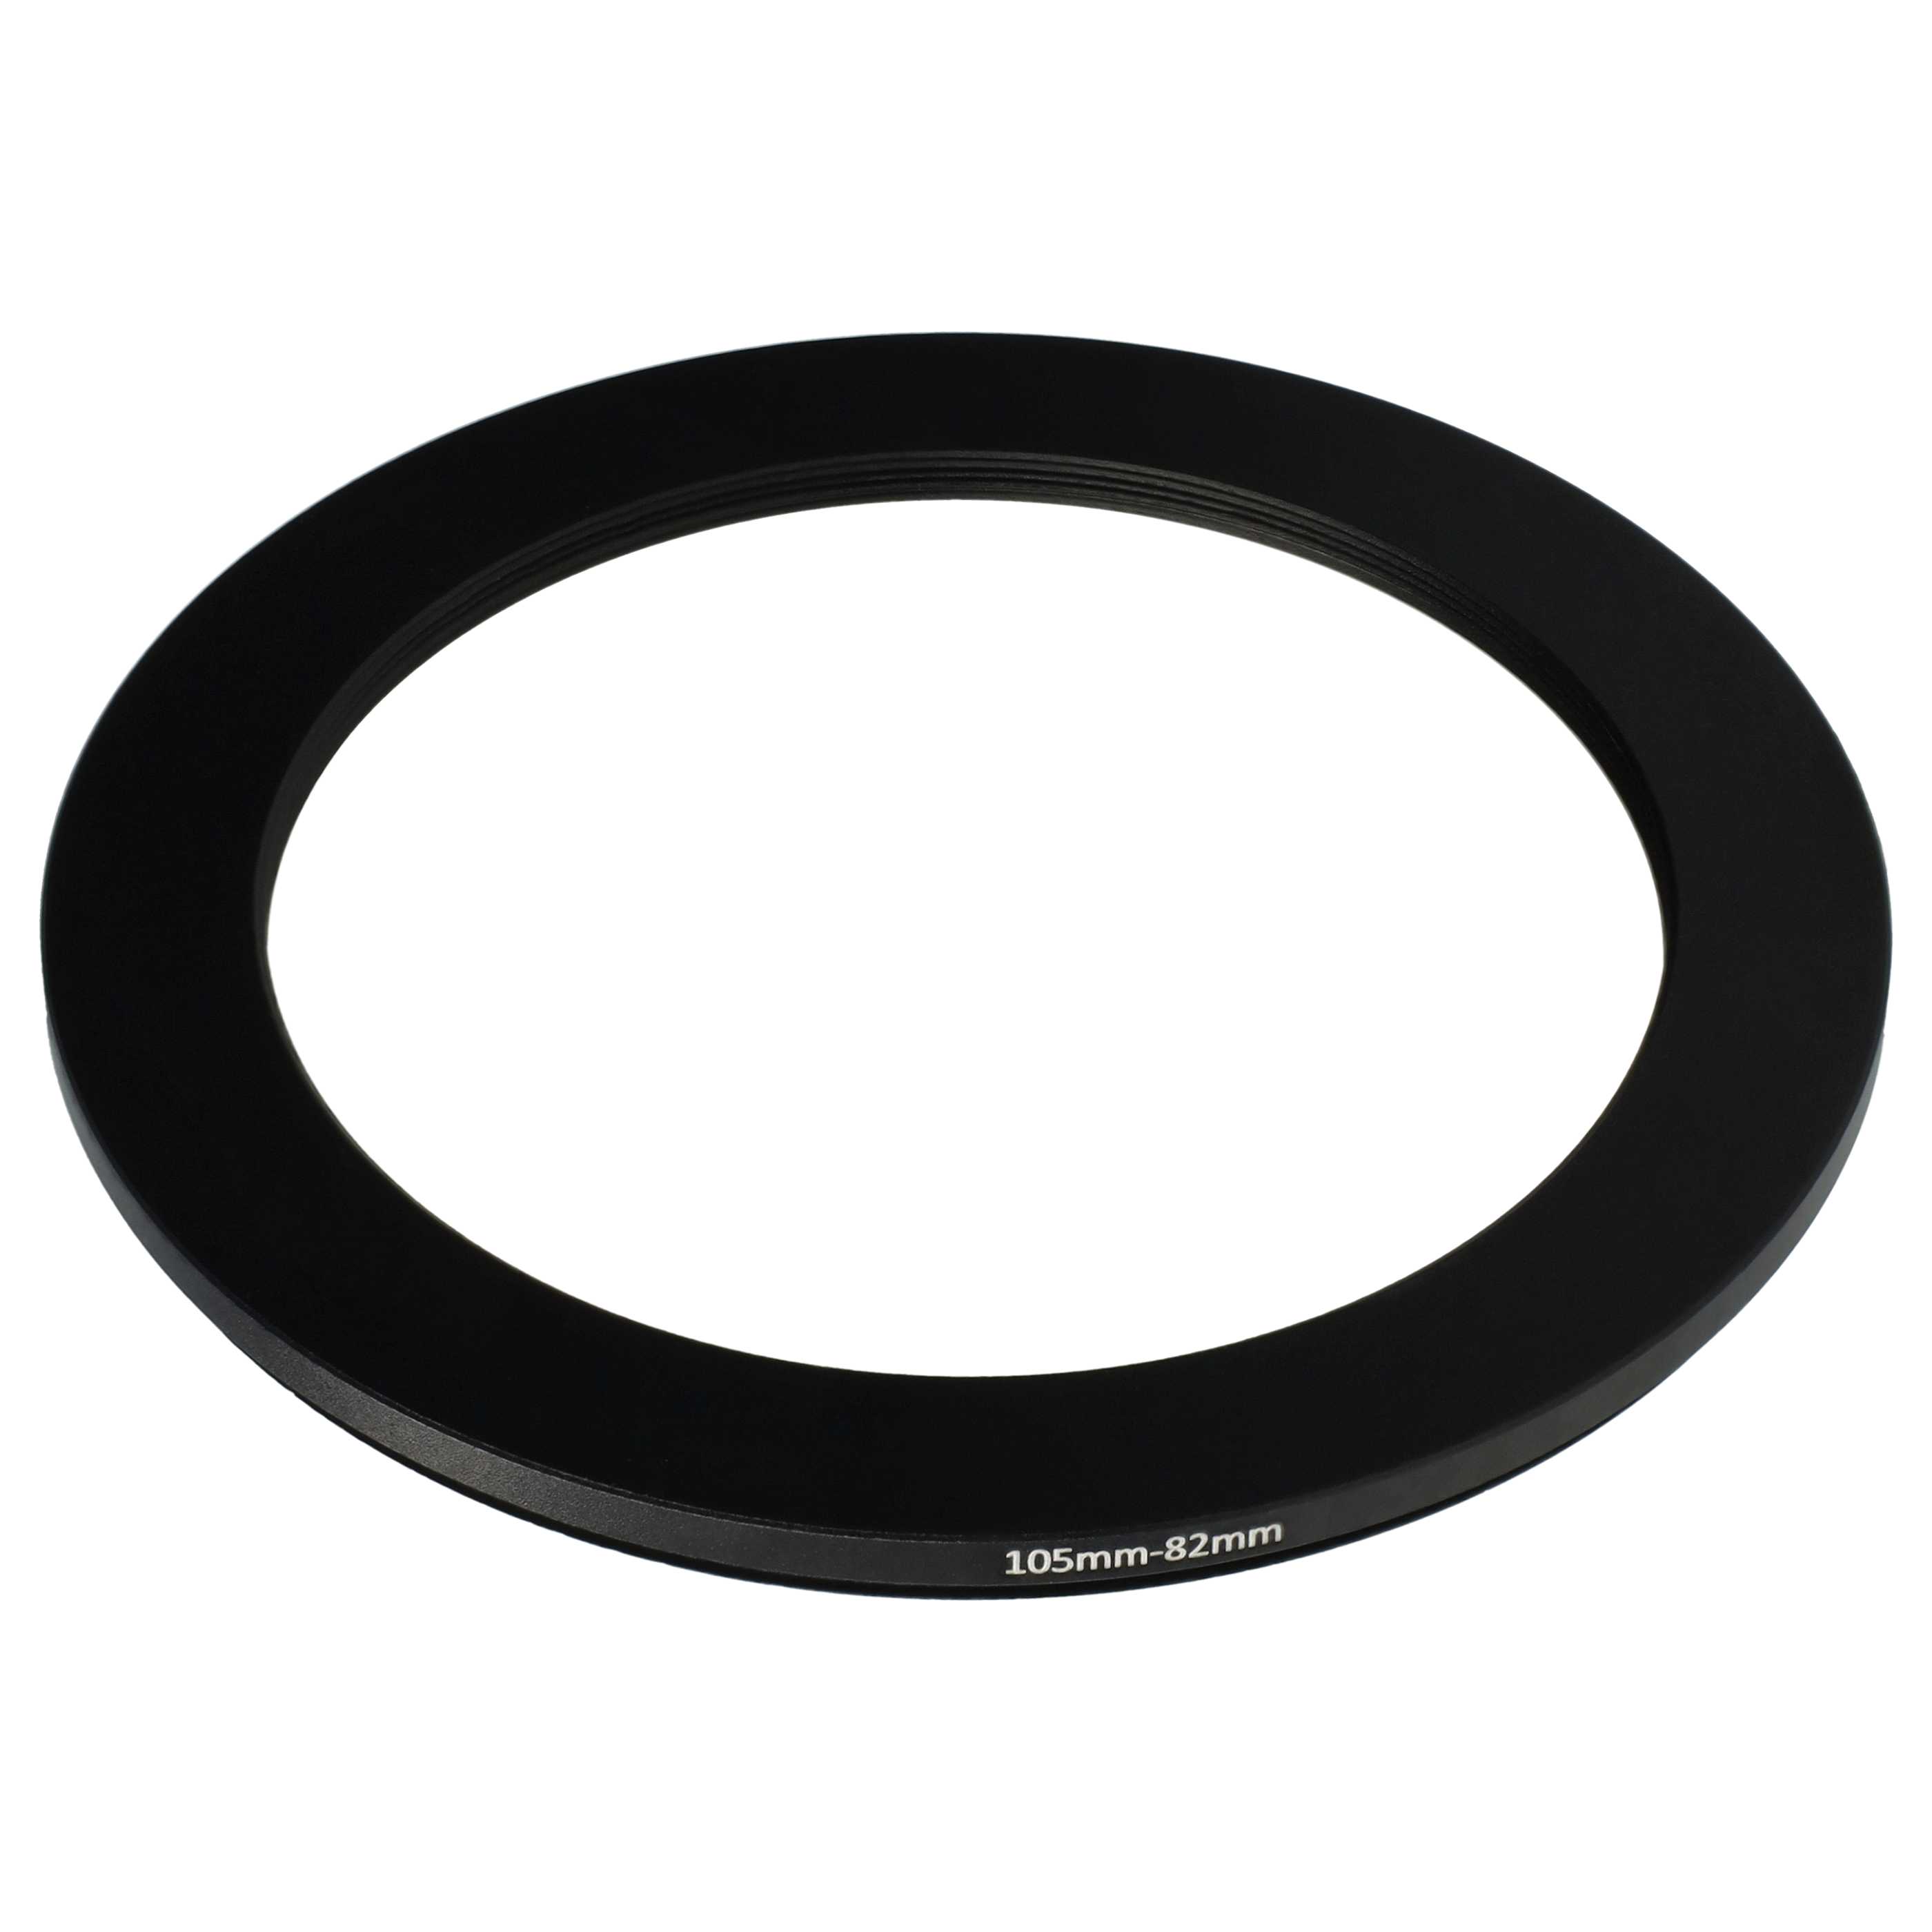 Step-Down Ring Adapter from 105 mm to 82 mm suitable for Camera Lens - Filter Adapter, metal